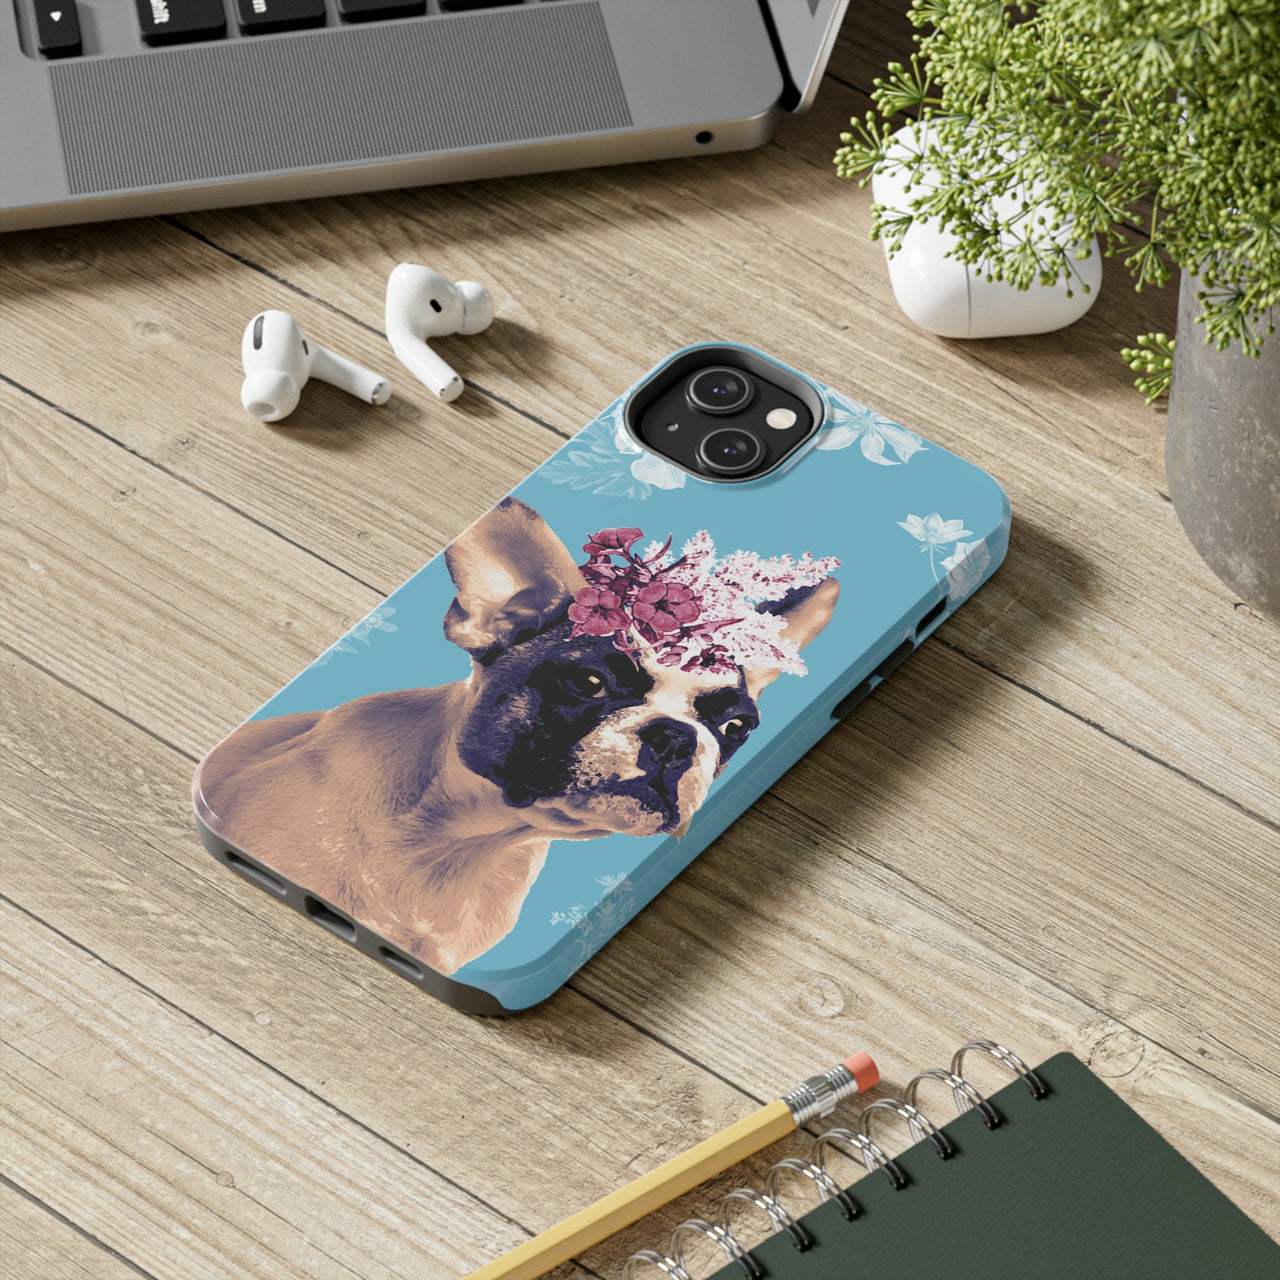 French Bulldog Phone Cases, Case-Mate